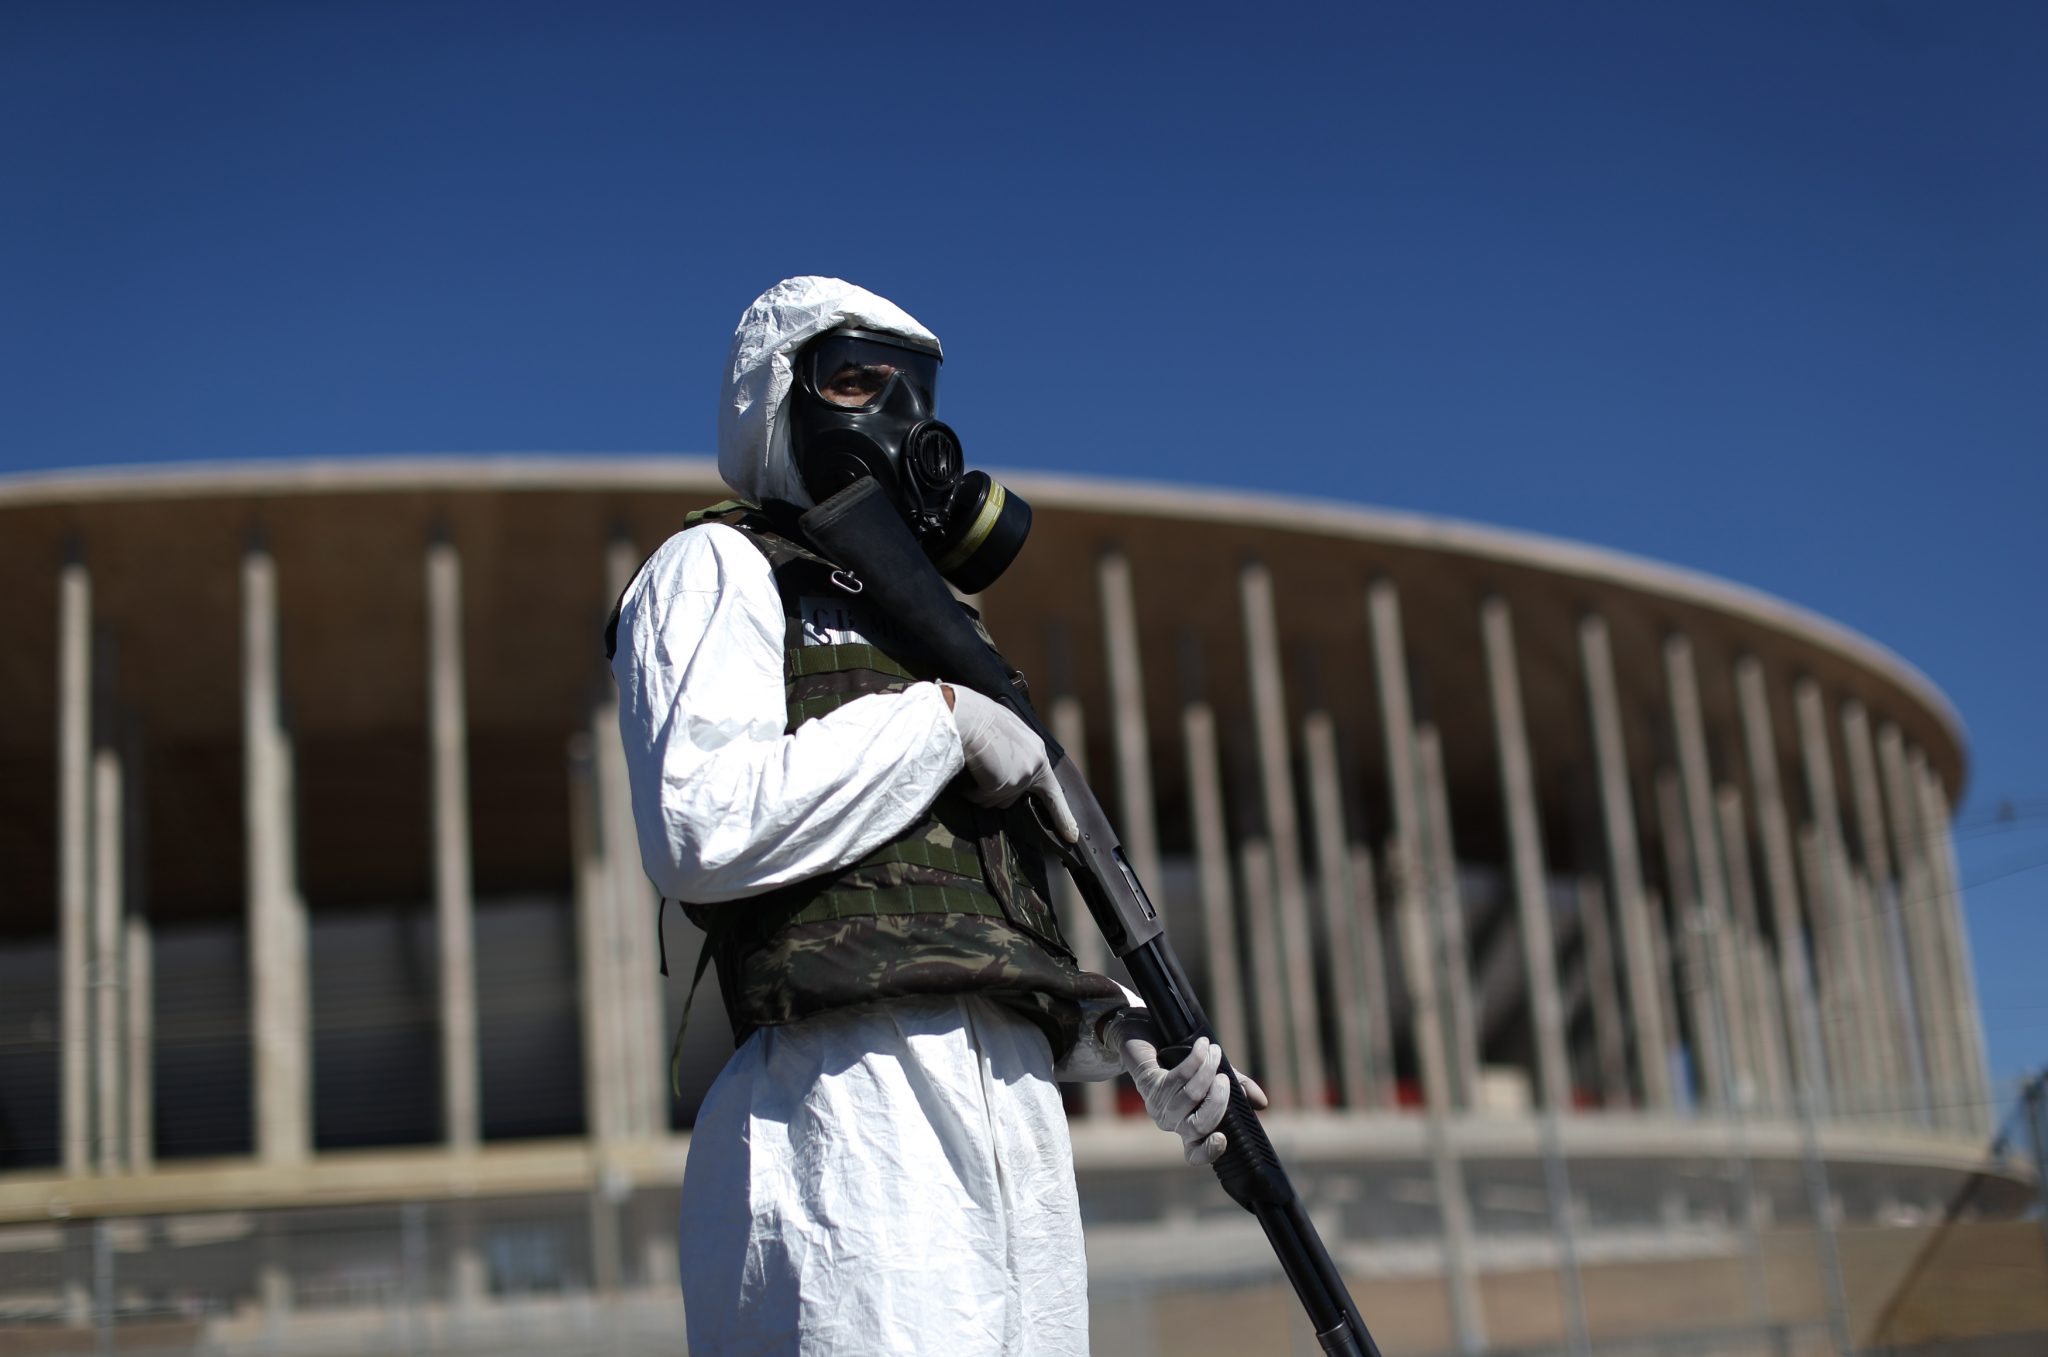 Soldier takes part in army exercise against possible chemical attack at the Mane Garrincha National Stadium in Brasilia | REUTERS